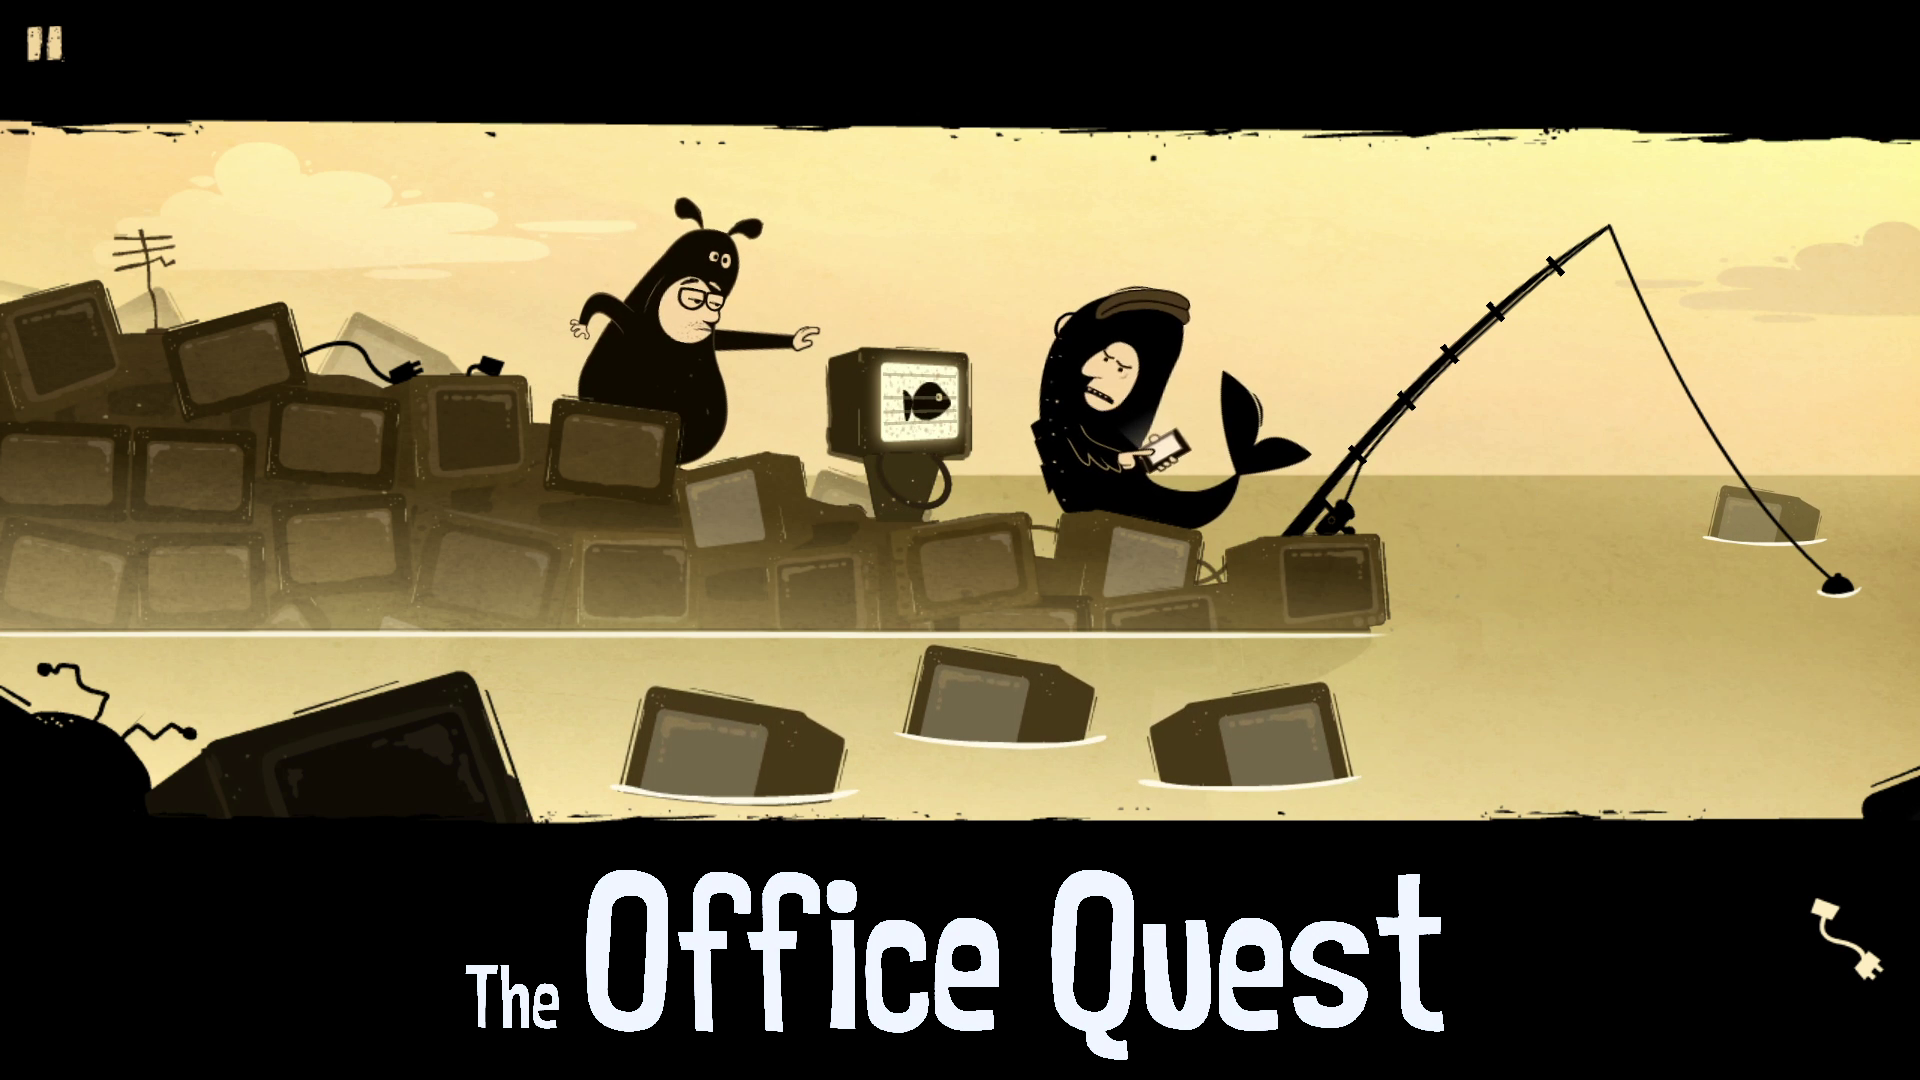 Inexplicably Televisions – Let’s Play The Office Quest Episode 3